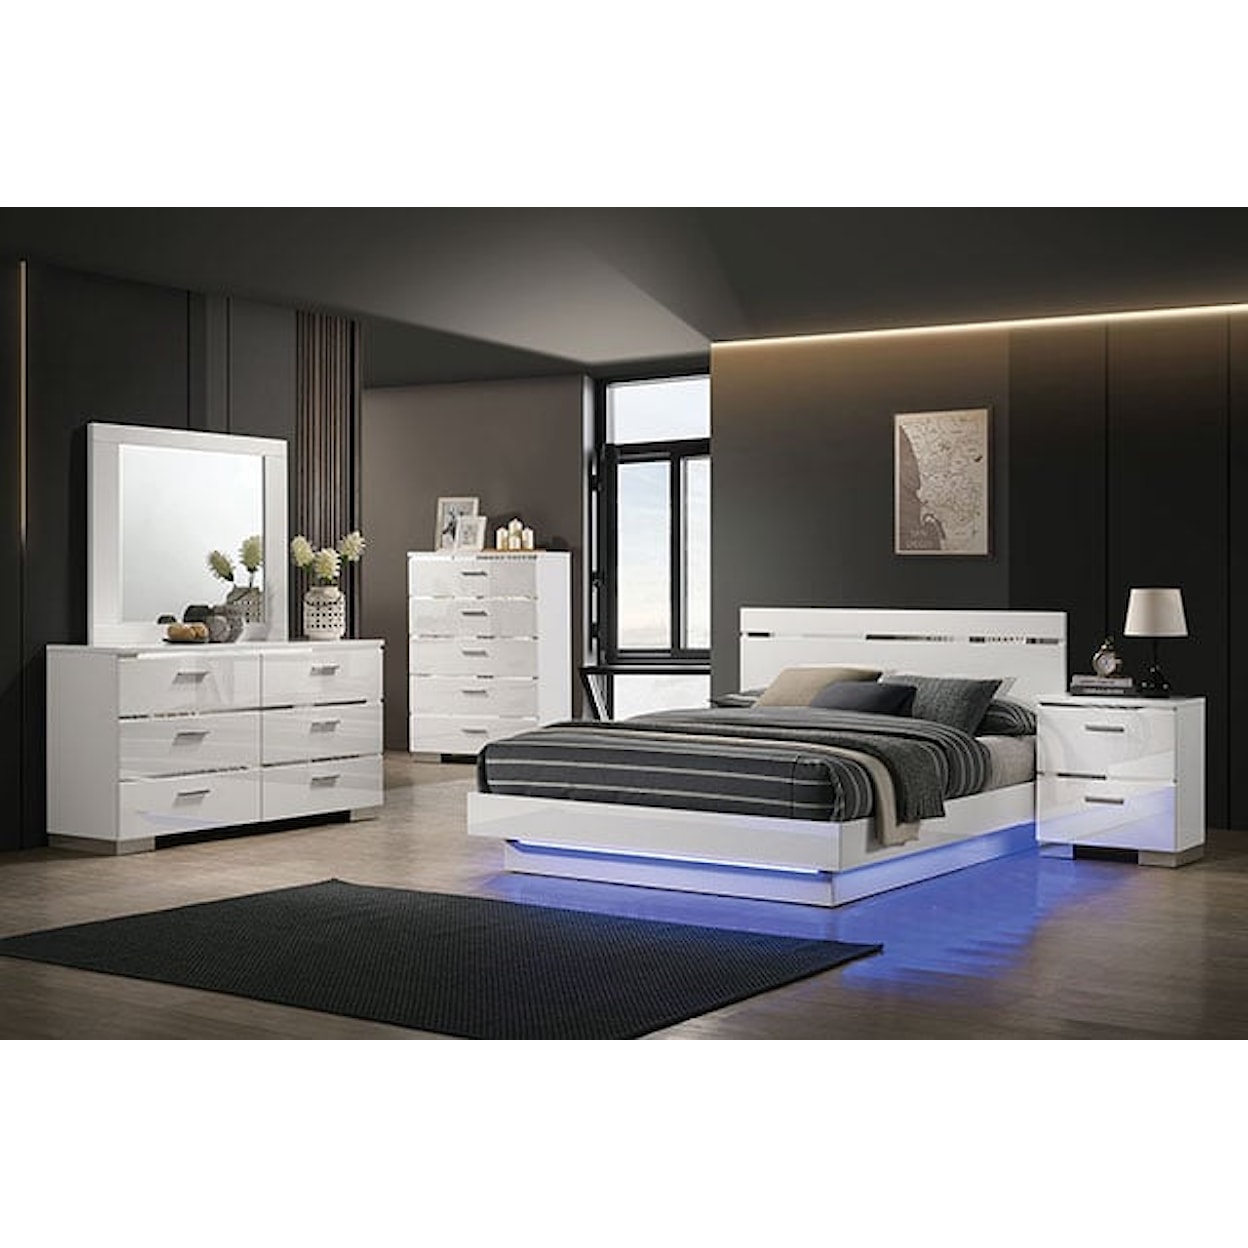 Furniture of America Erlach Queen Bed with LED Lighting Lining